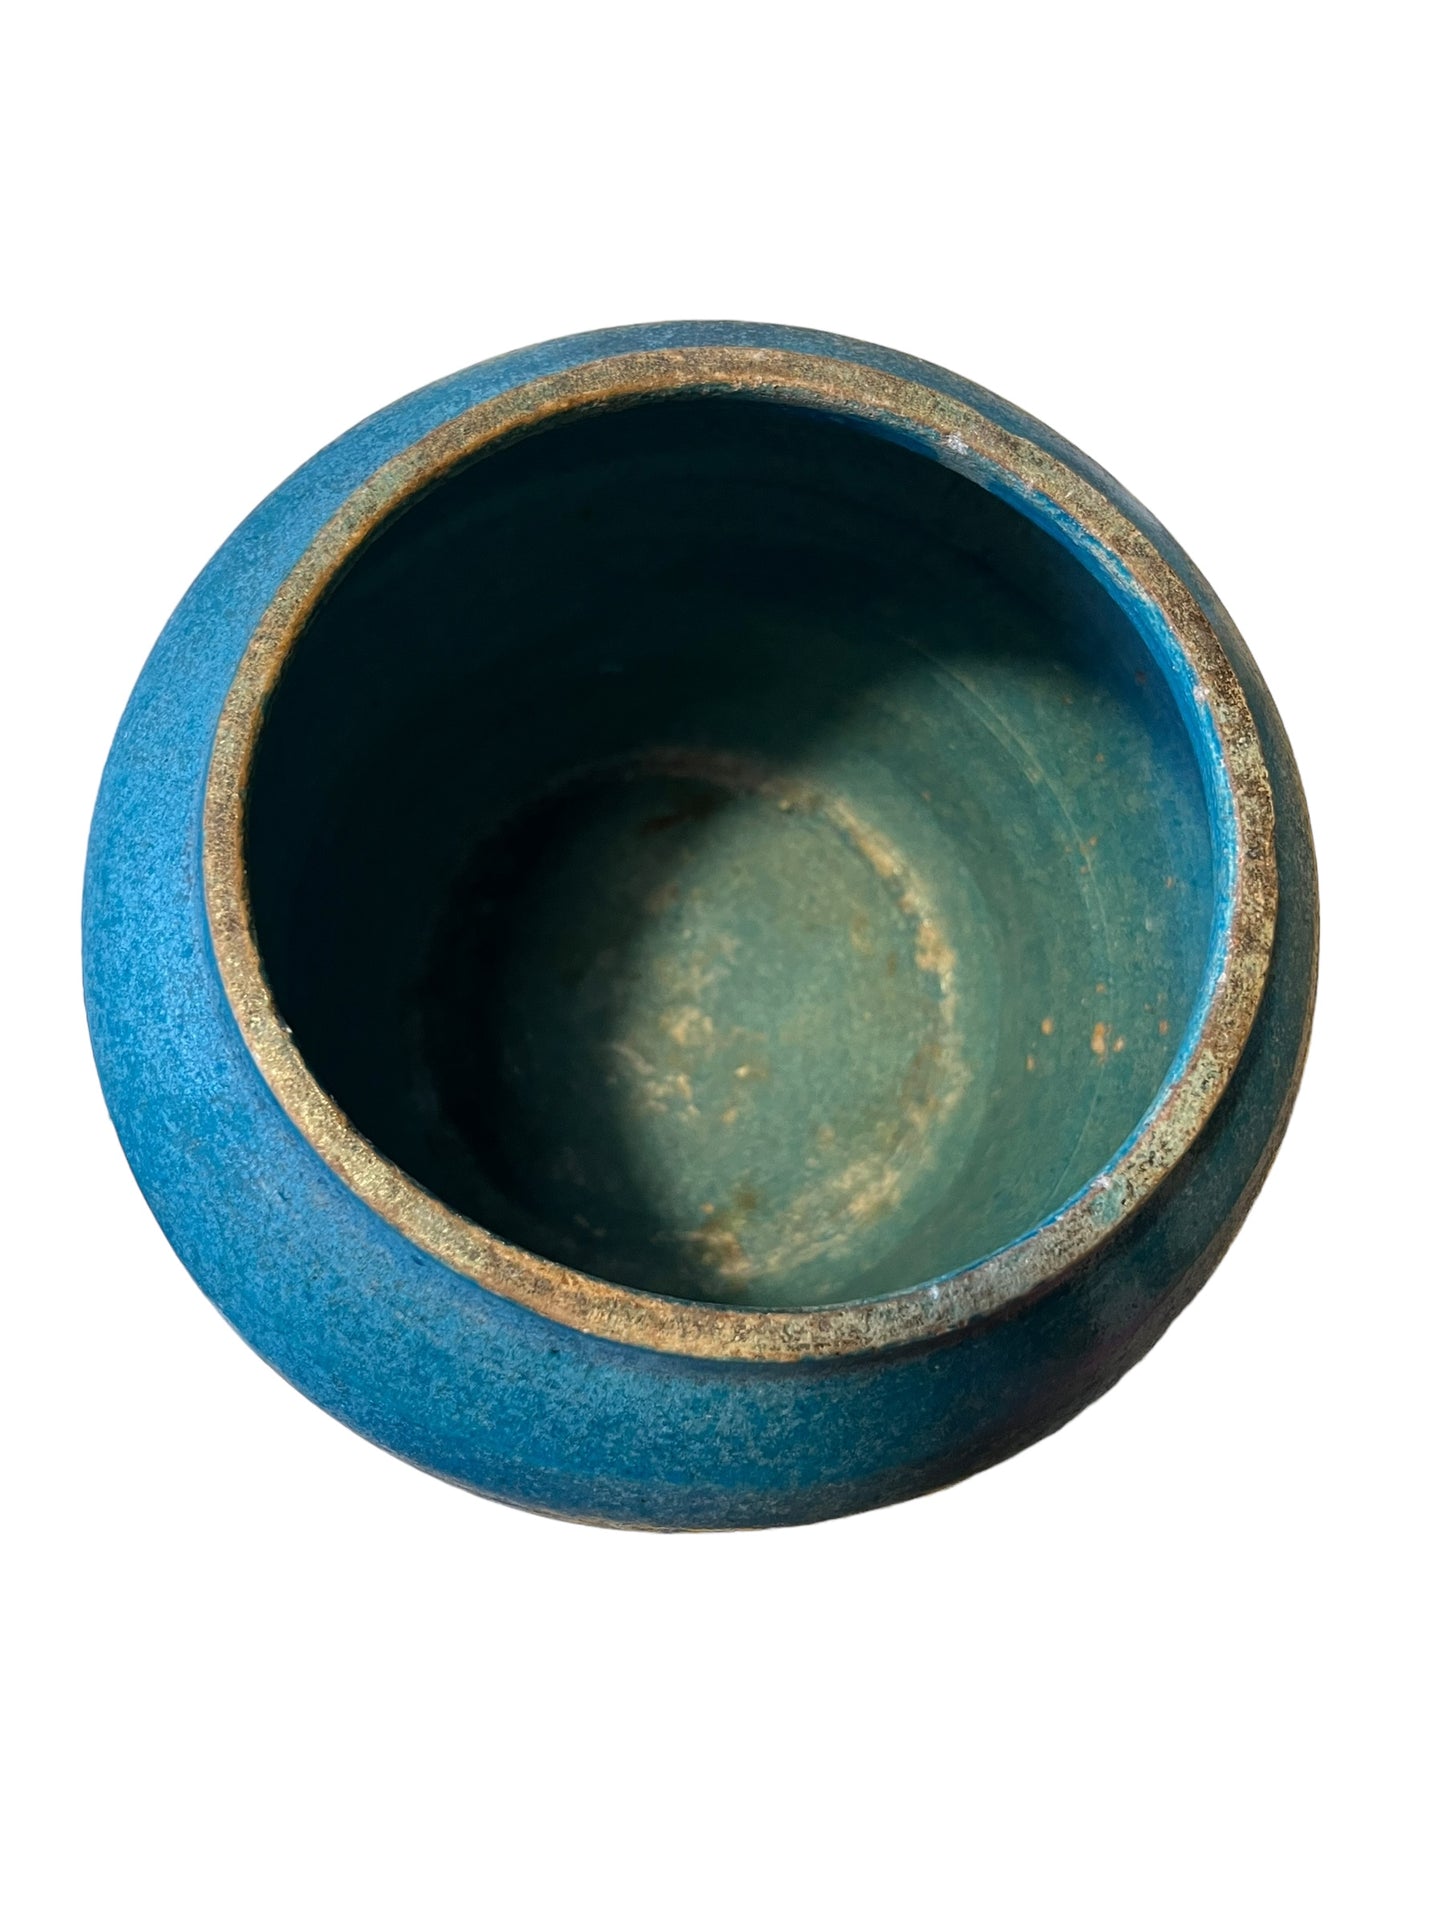 Chinese provincial pot blue glaze Ming period